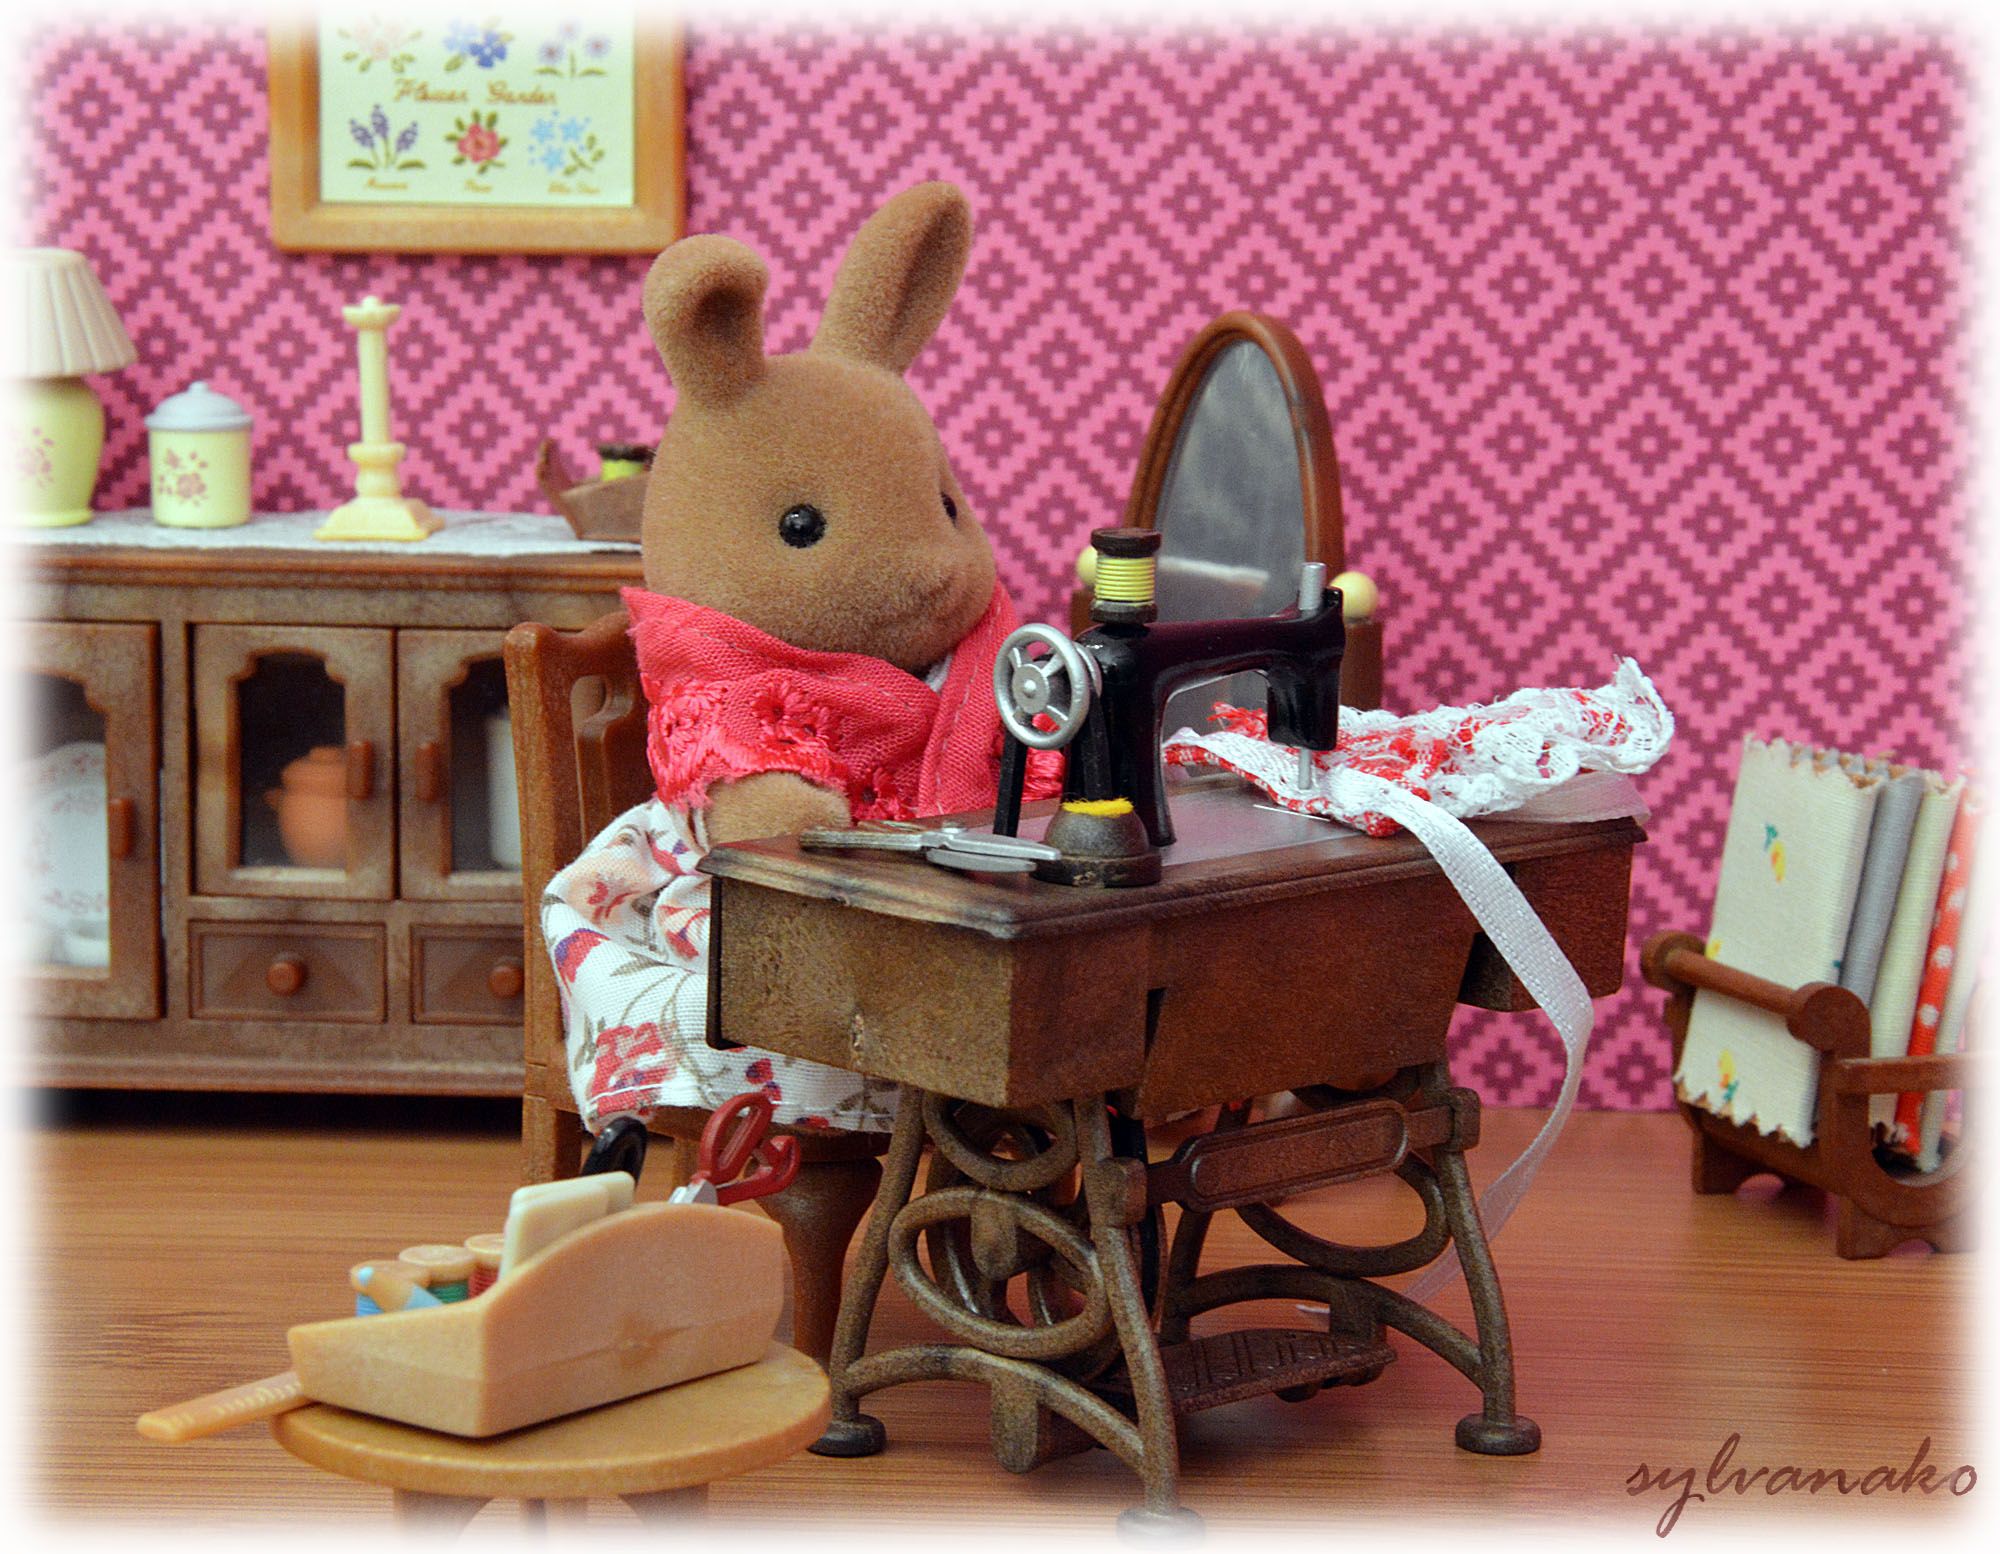 Wallpaper, girls, house, cute, home, animal, Toy, toys, miniature, dress, grandmother, sweet, sewing, families, grandparents, calico, critters, rabbits, granny, sylvanianfamilies, sylvanian, calicocritters 2000x1554